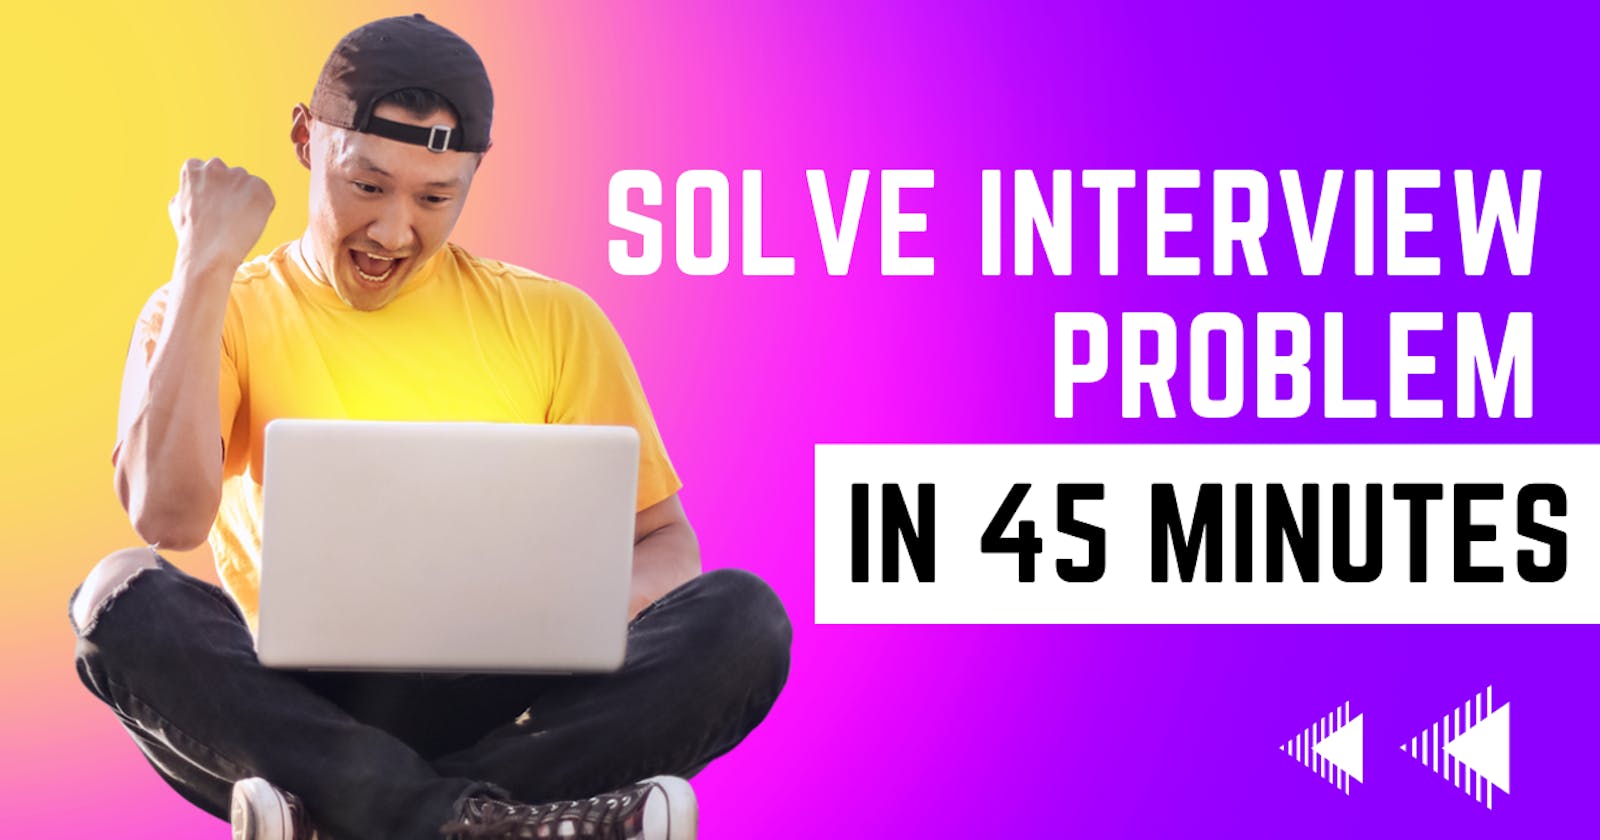 Hack to solve coding problems in less than 45 minutes